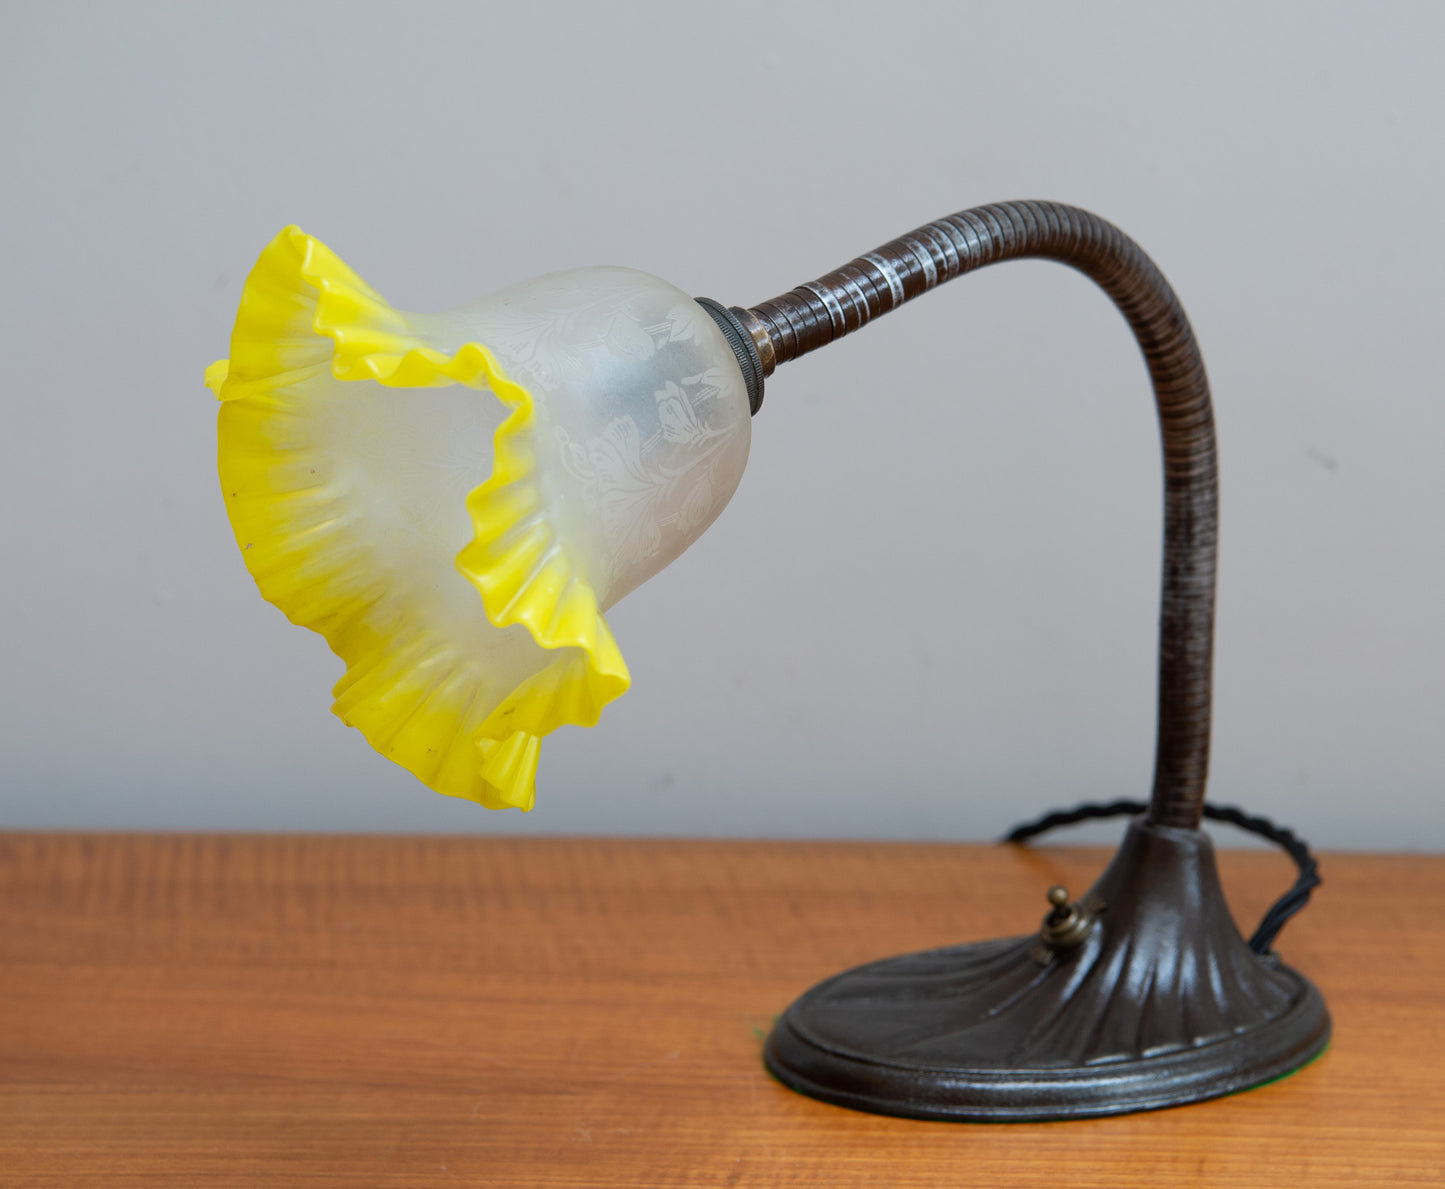 1920s Vintage Goose Neck Desk Lamp With Glass Shade.